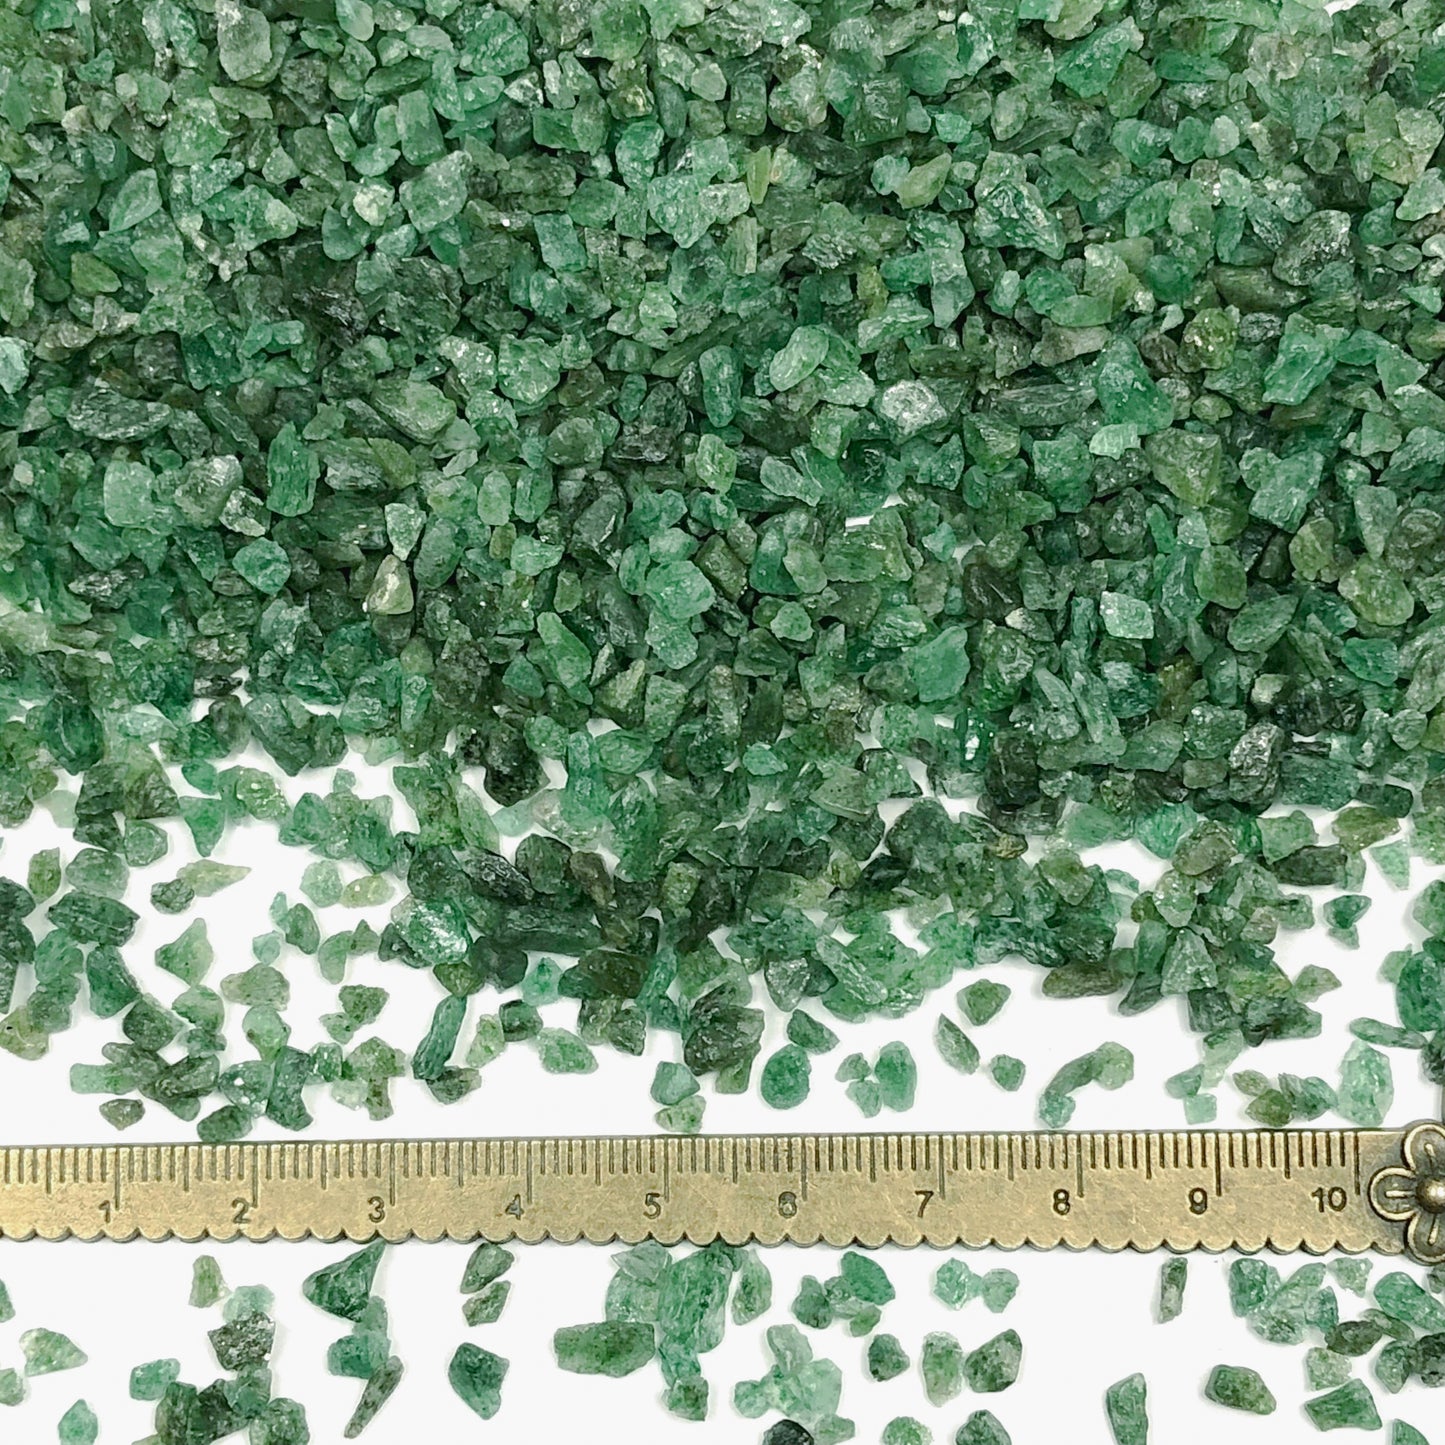 Crushed Green Emerald (Grade A) from India, Coarse Crush, Gravel Size, 4mm - 2mm